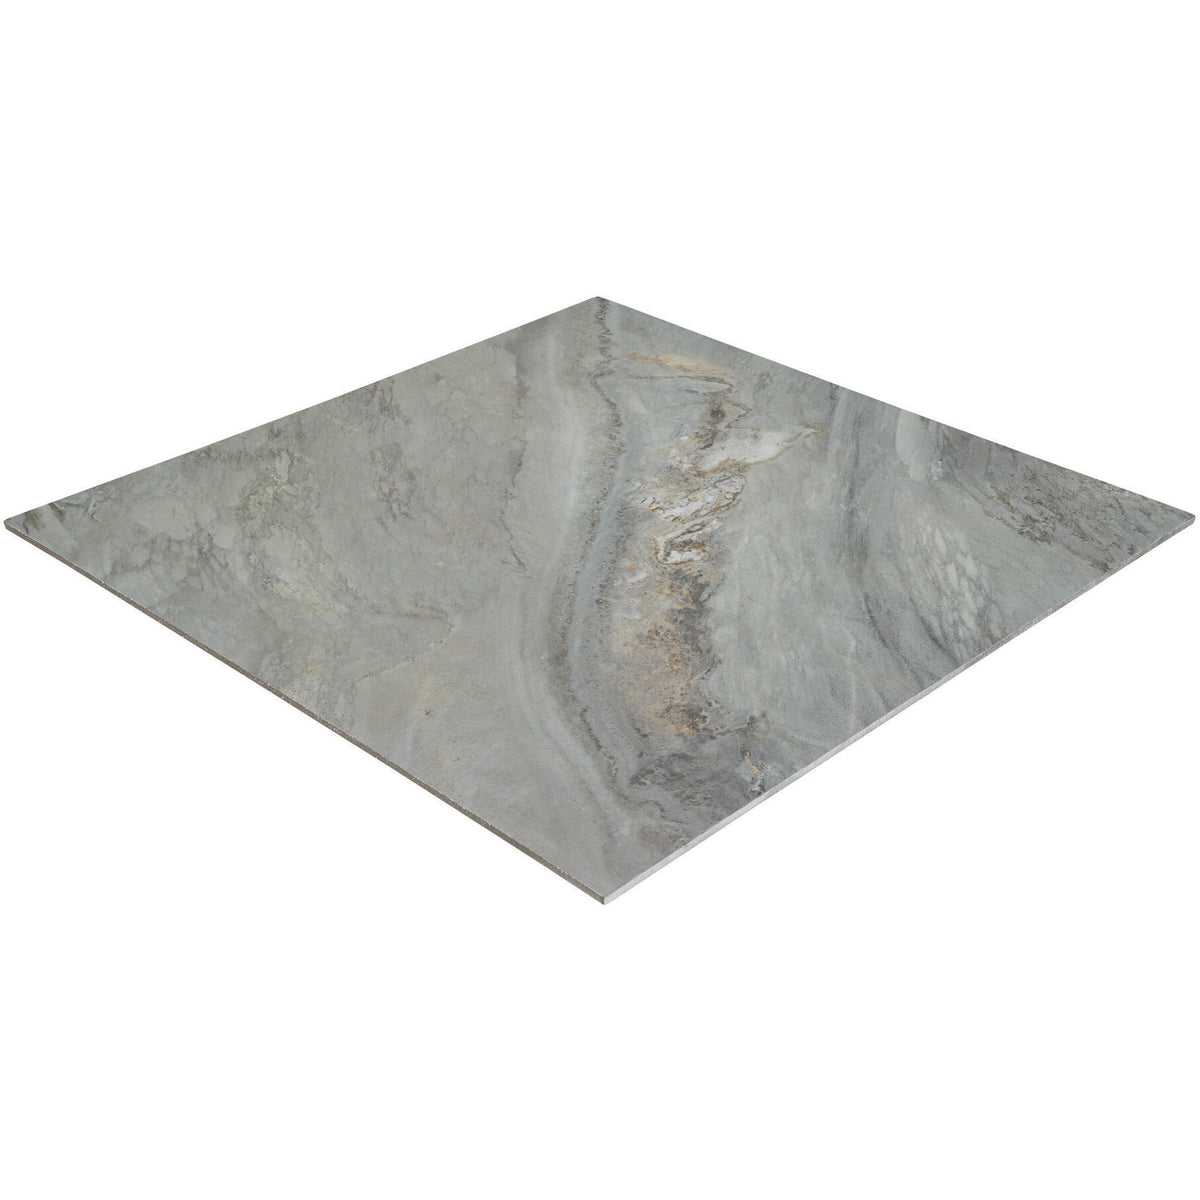 Marazzi - Savoir - 24 in. x 24 in. Colorbody Porcelain Tile - Bleu Polished Angled View